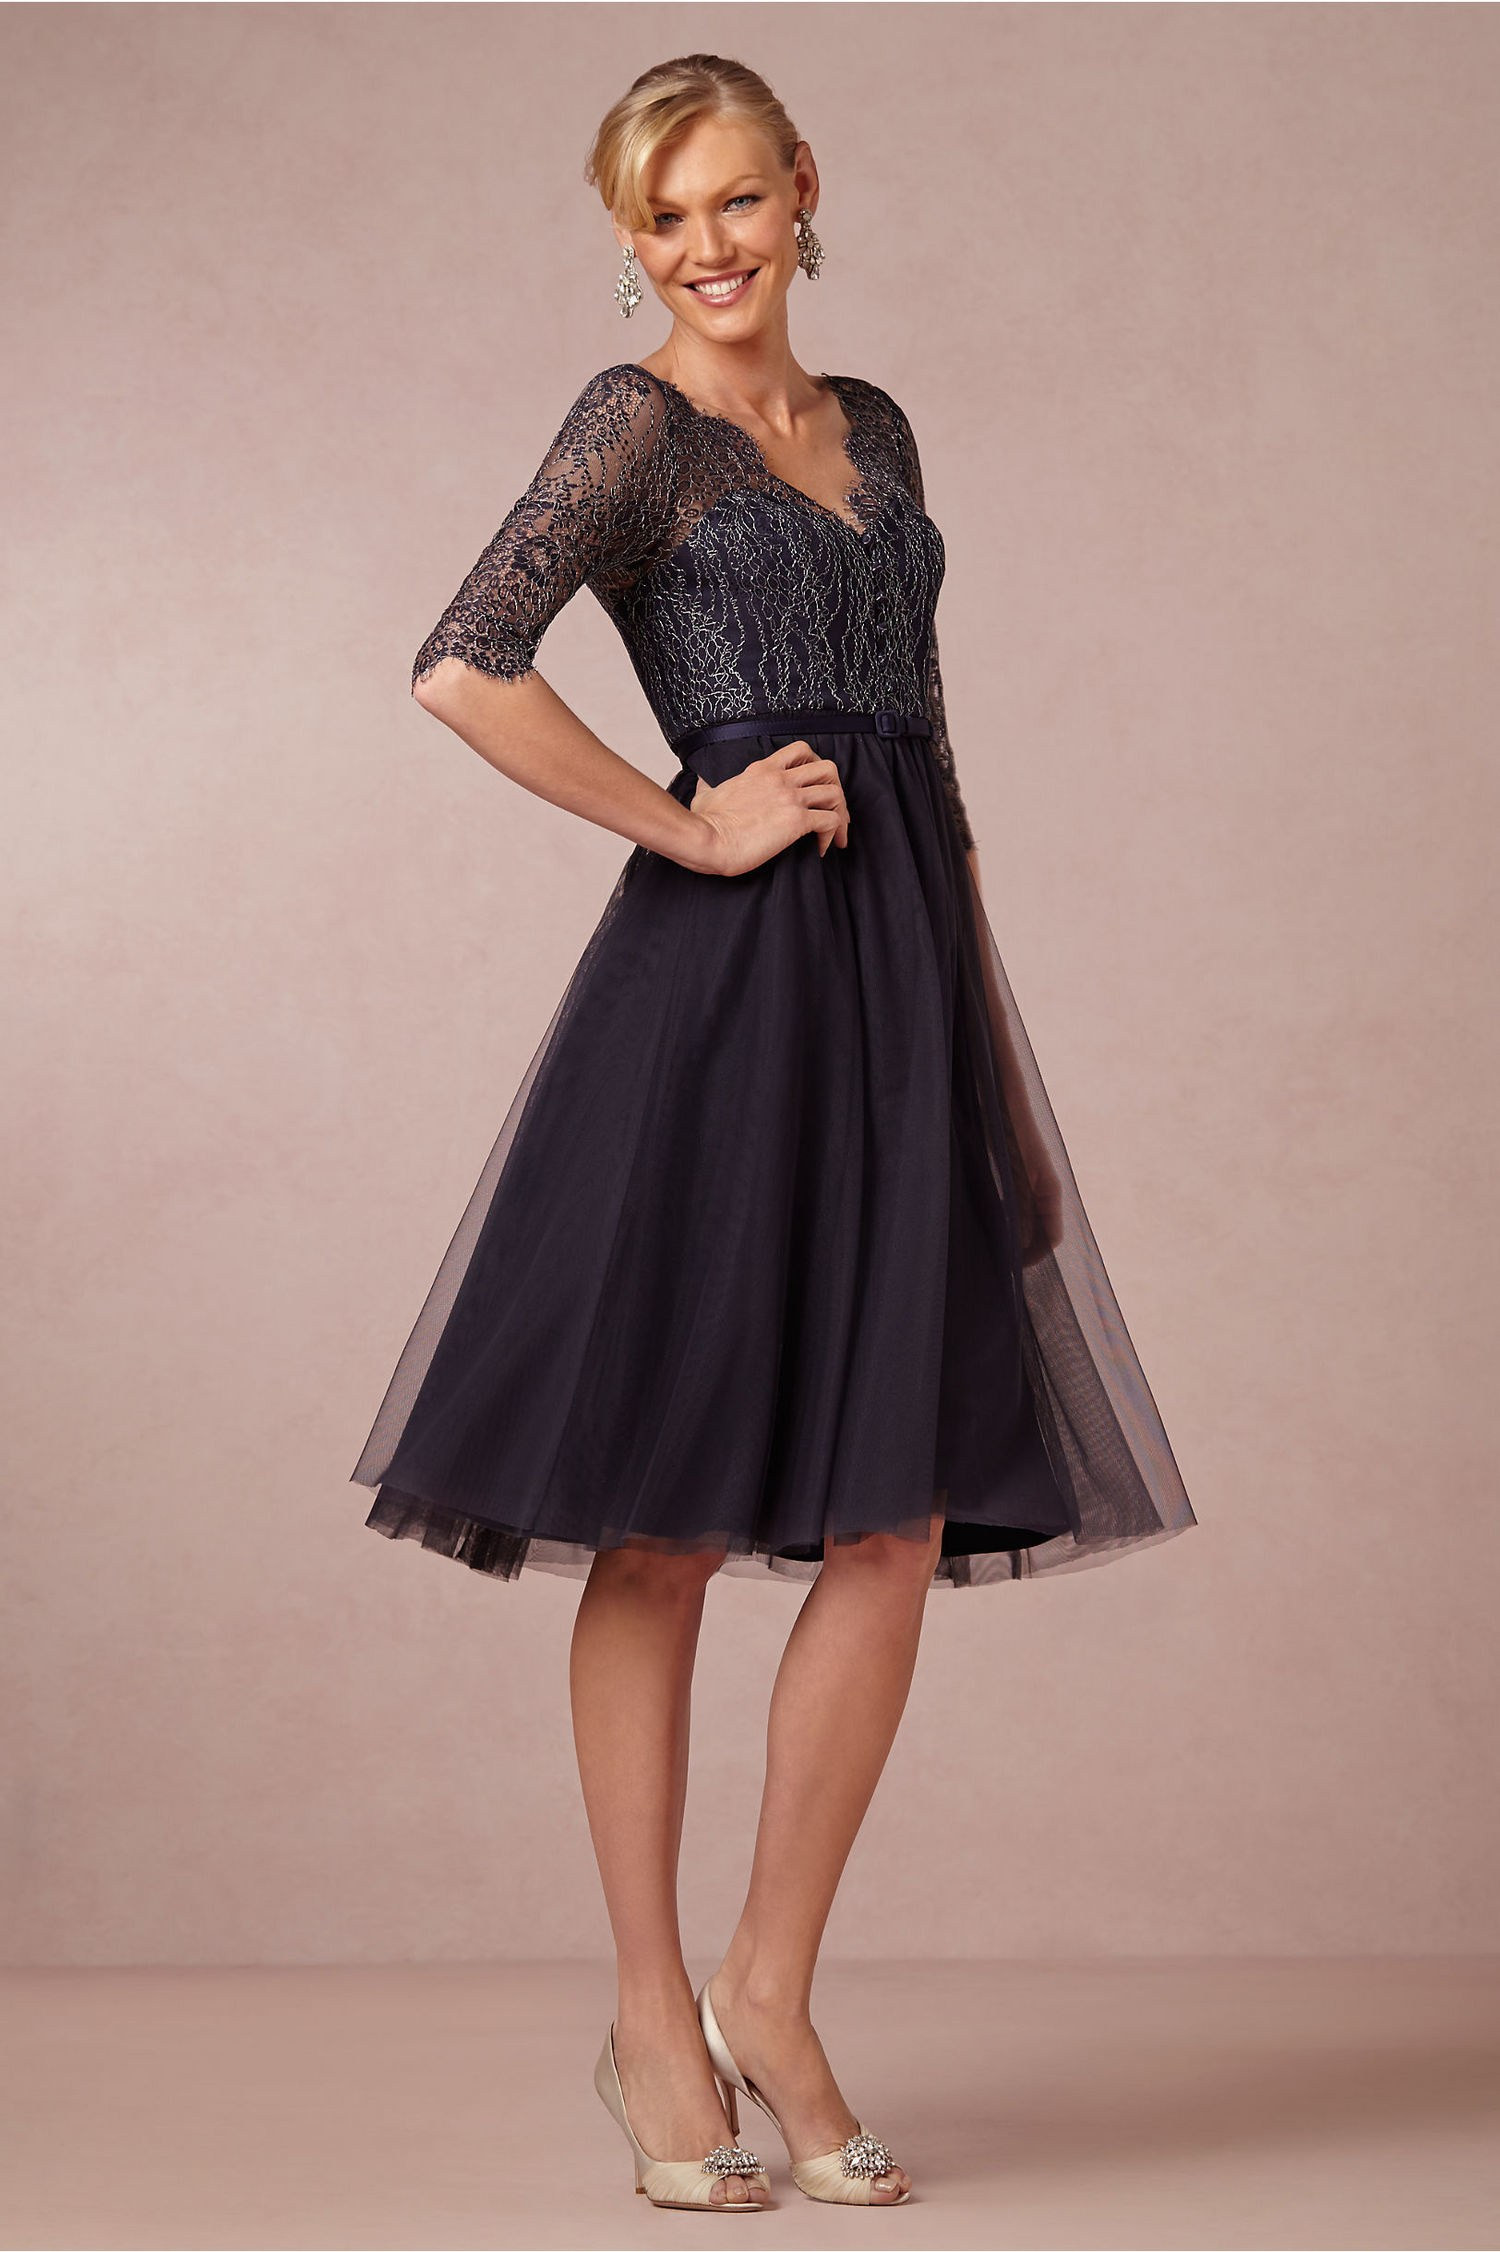 Dresses To Wear To A Wedding As A Guest
 7 Dresses to Wear to a Winter Wedding Cause There s